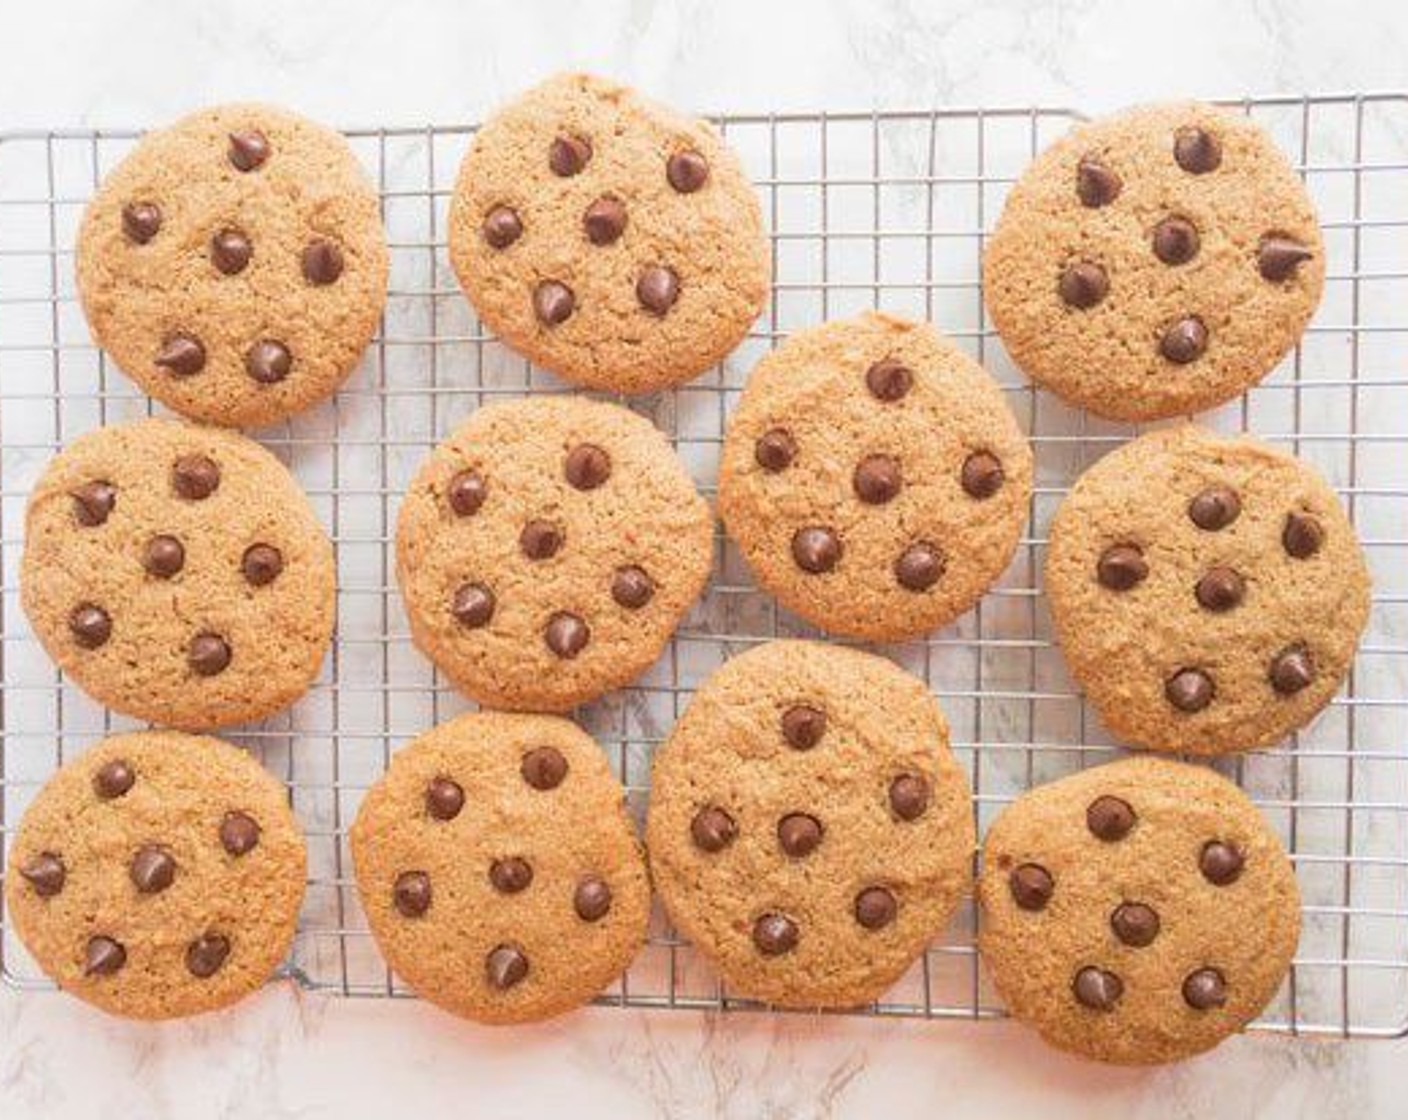 step 7 Remove from hot cookie sheet and allow to stand for 10 minutes. These will stay soft and chewy for days if they last that long!